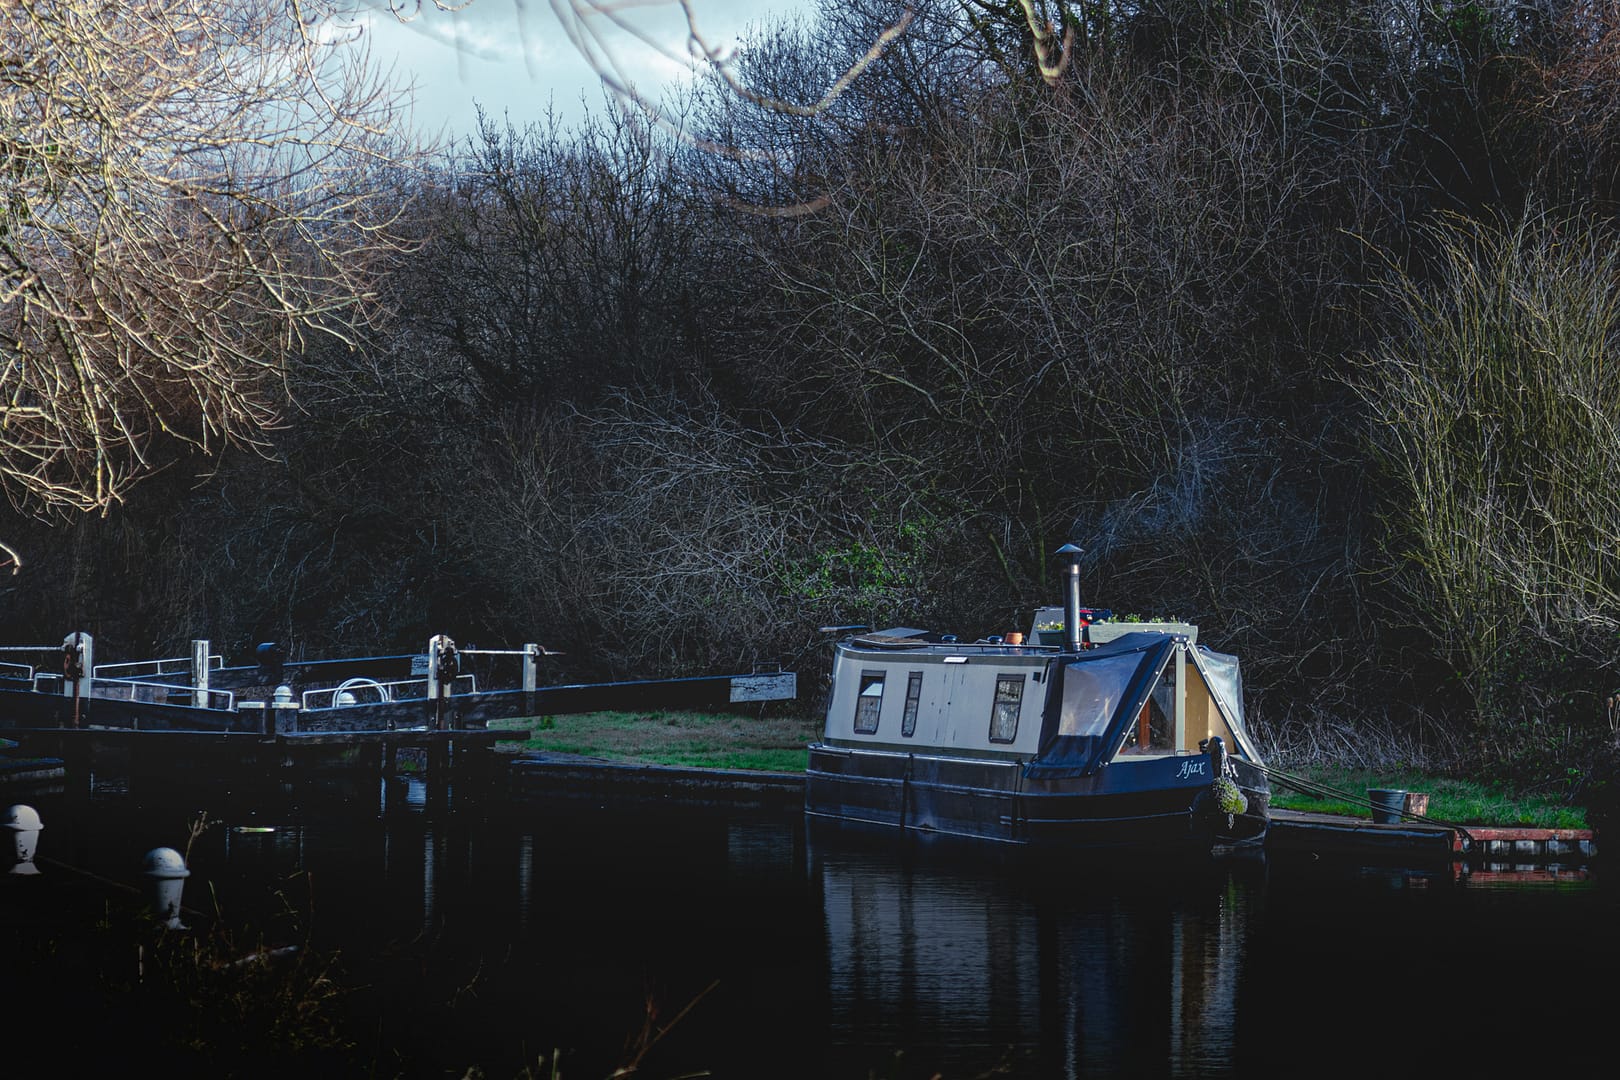 Aldermaston Wharf Winter and a lonely narrow boat by the lock on the Kennet and Avon Canal.